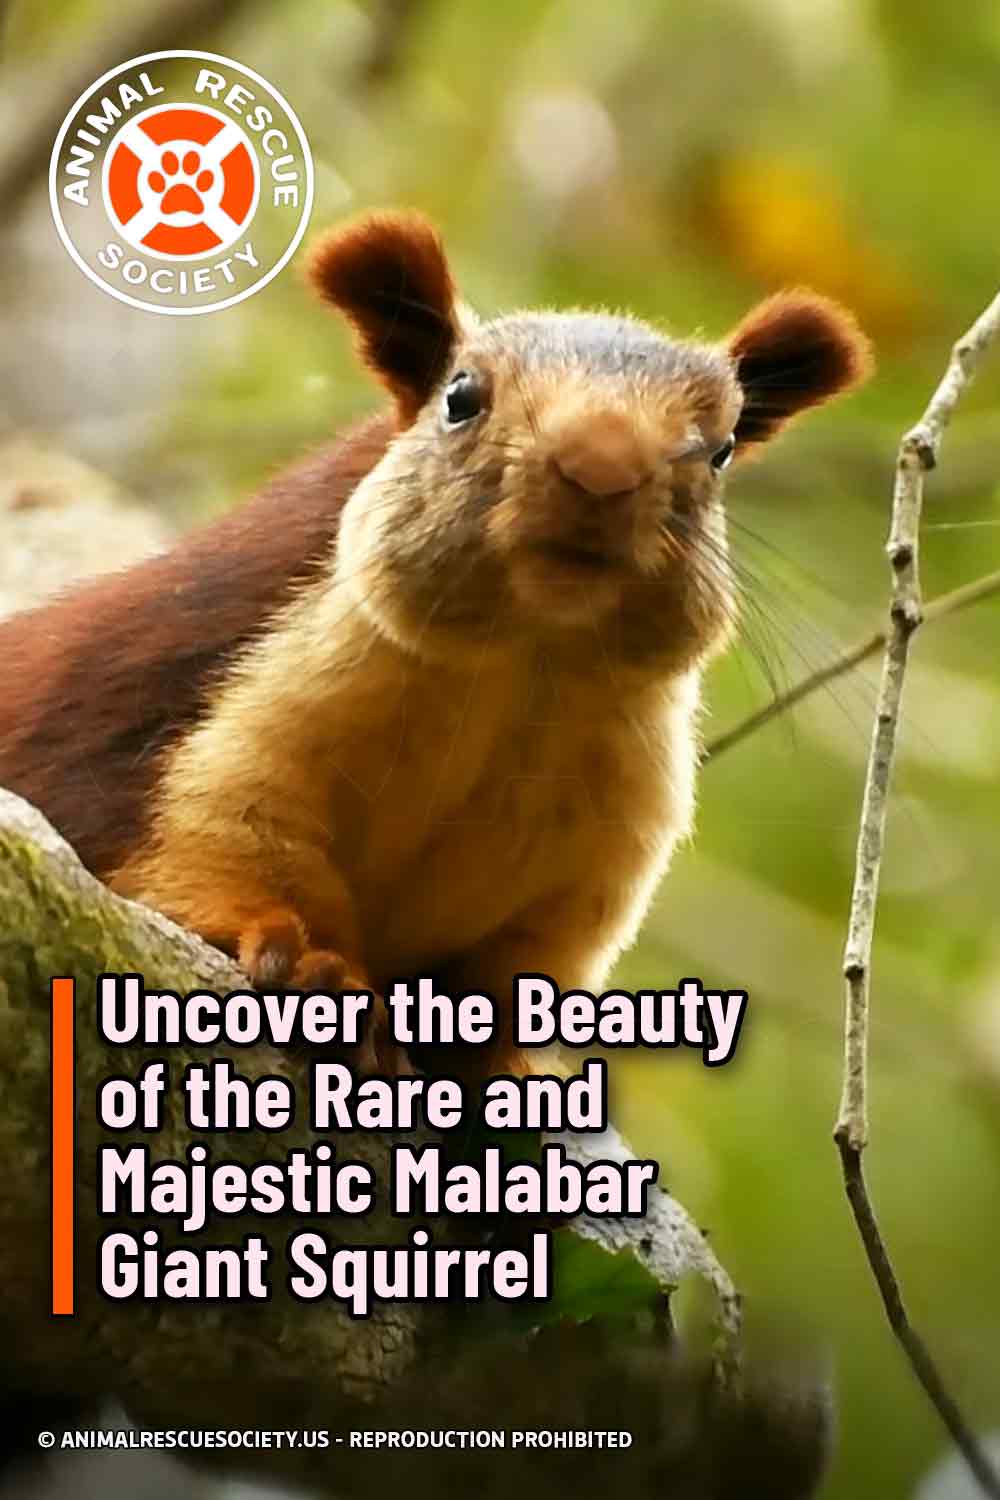 Uncover the Beauty of the Rare and Majestic Malabar Giant Squirrel